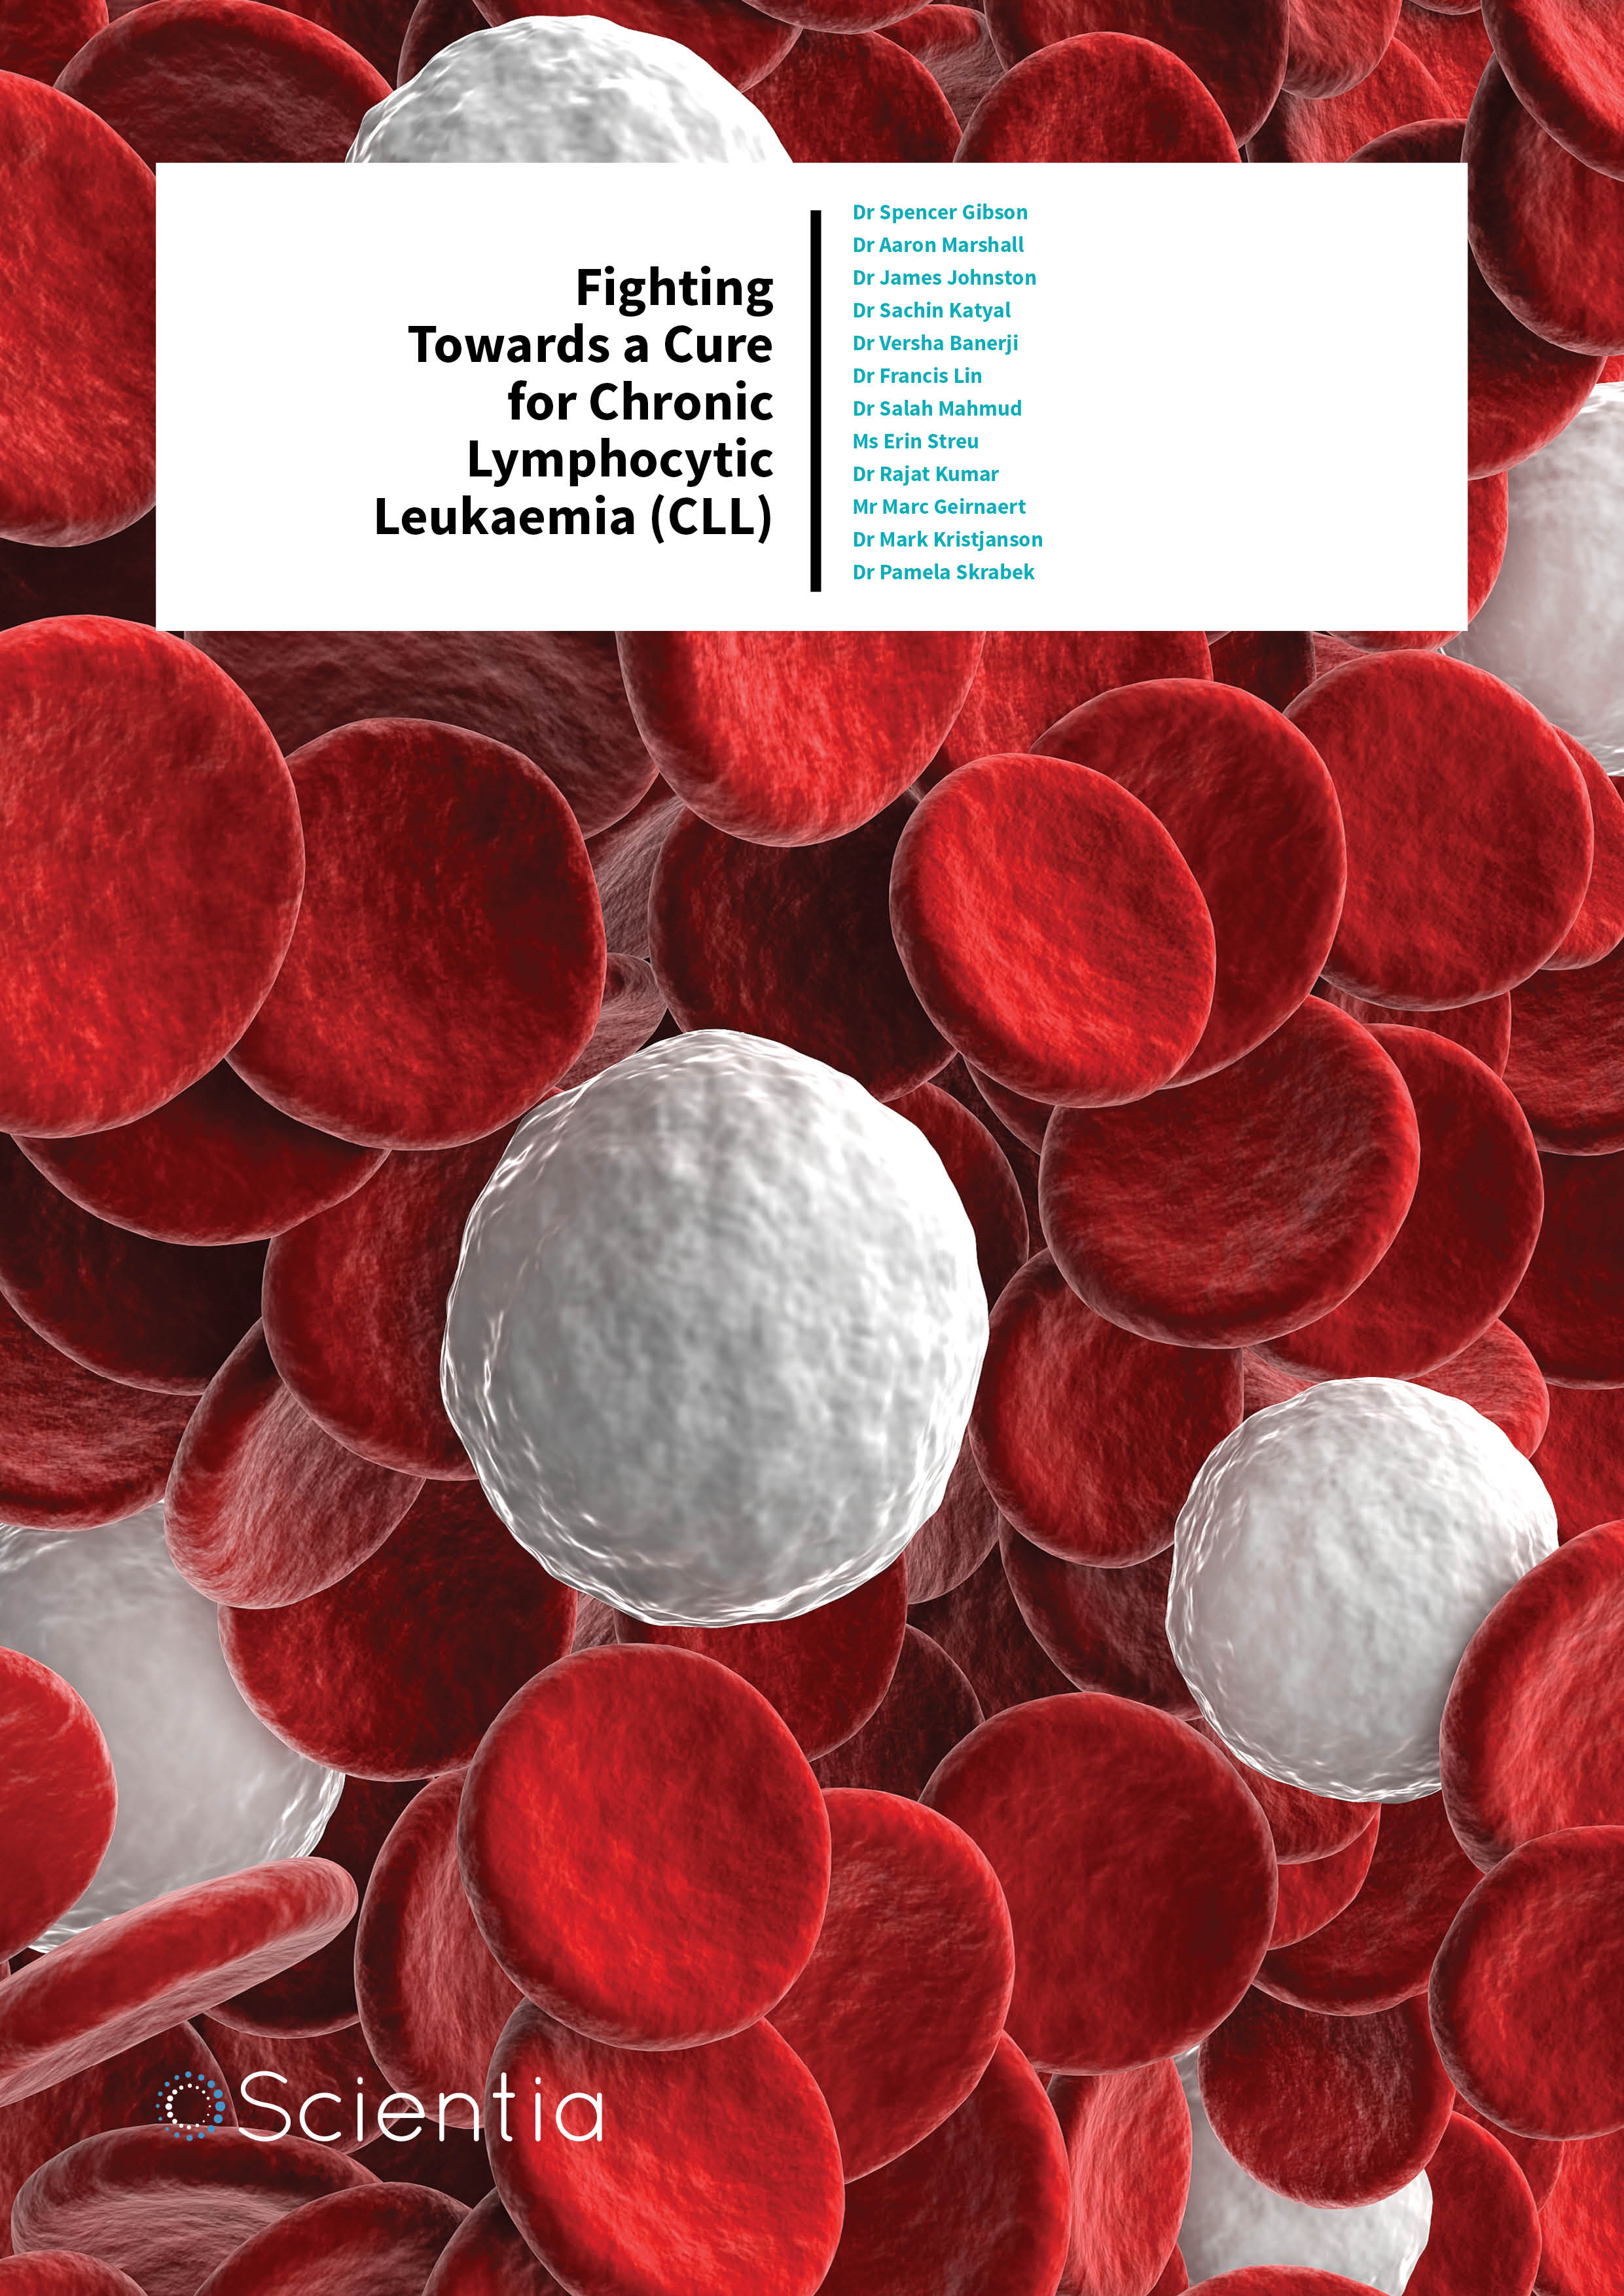 Fighting Towards a Cure for Chronic Lymphocytic Leukaemia (CLL)